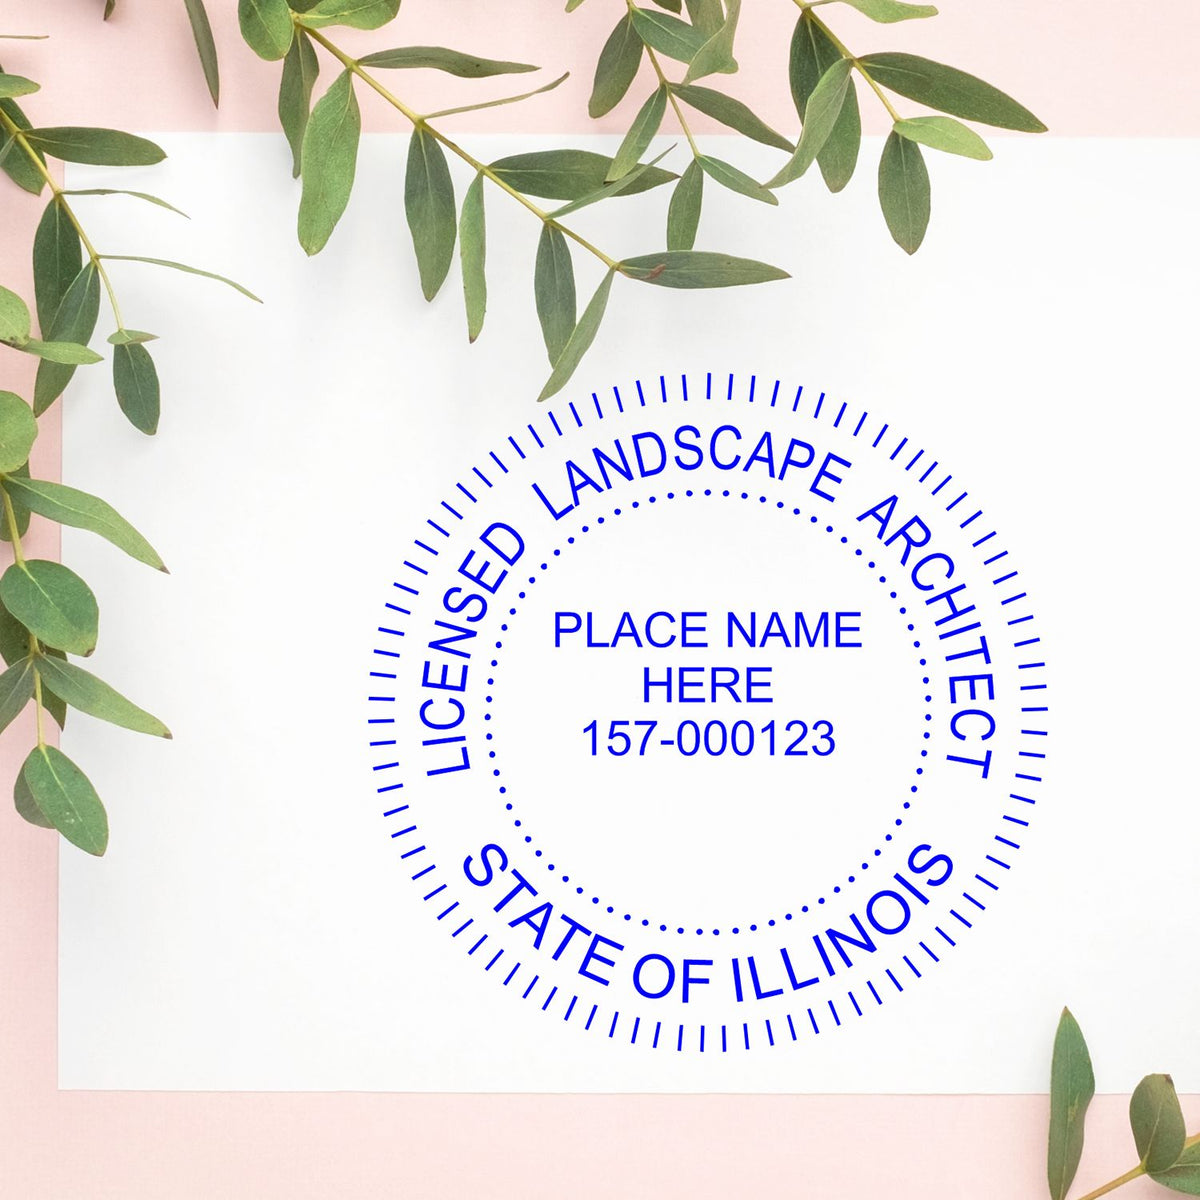 This paper is stamped with a sample imprint of the Self-Inking Illinois Landscape Architect Stamp, signifying its quality and reliability.